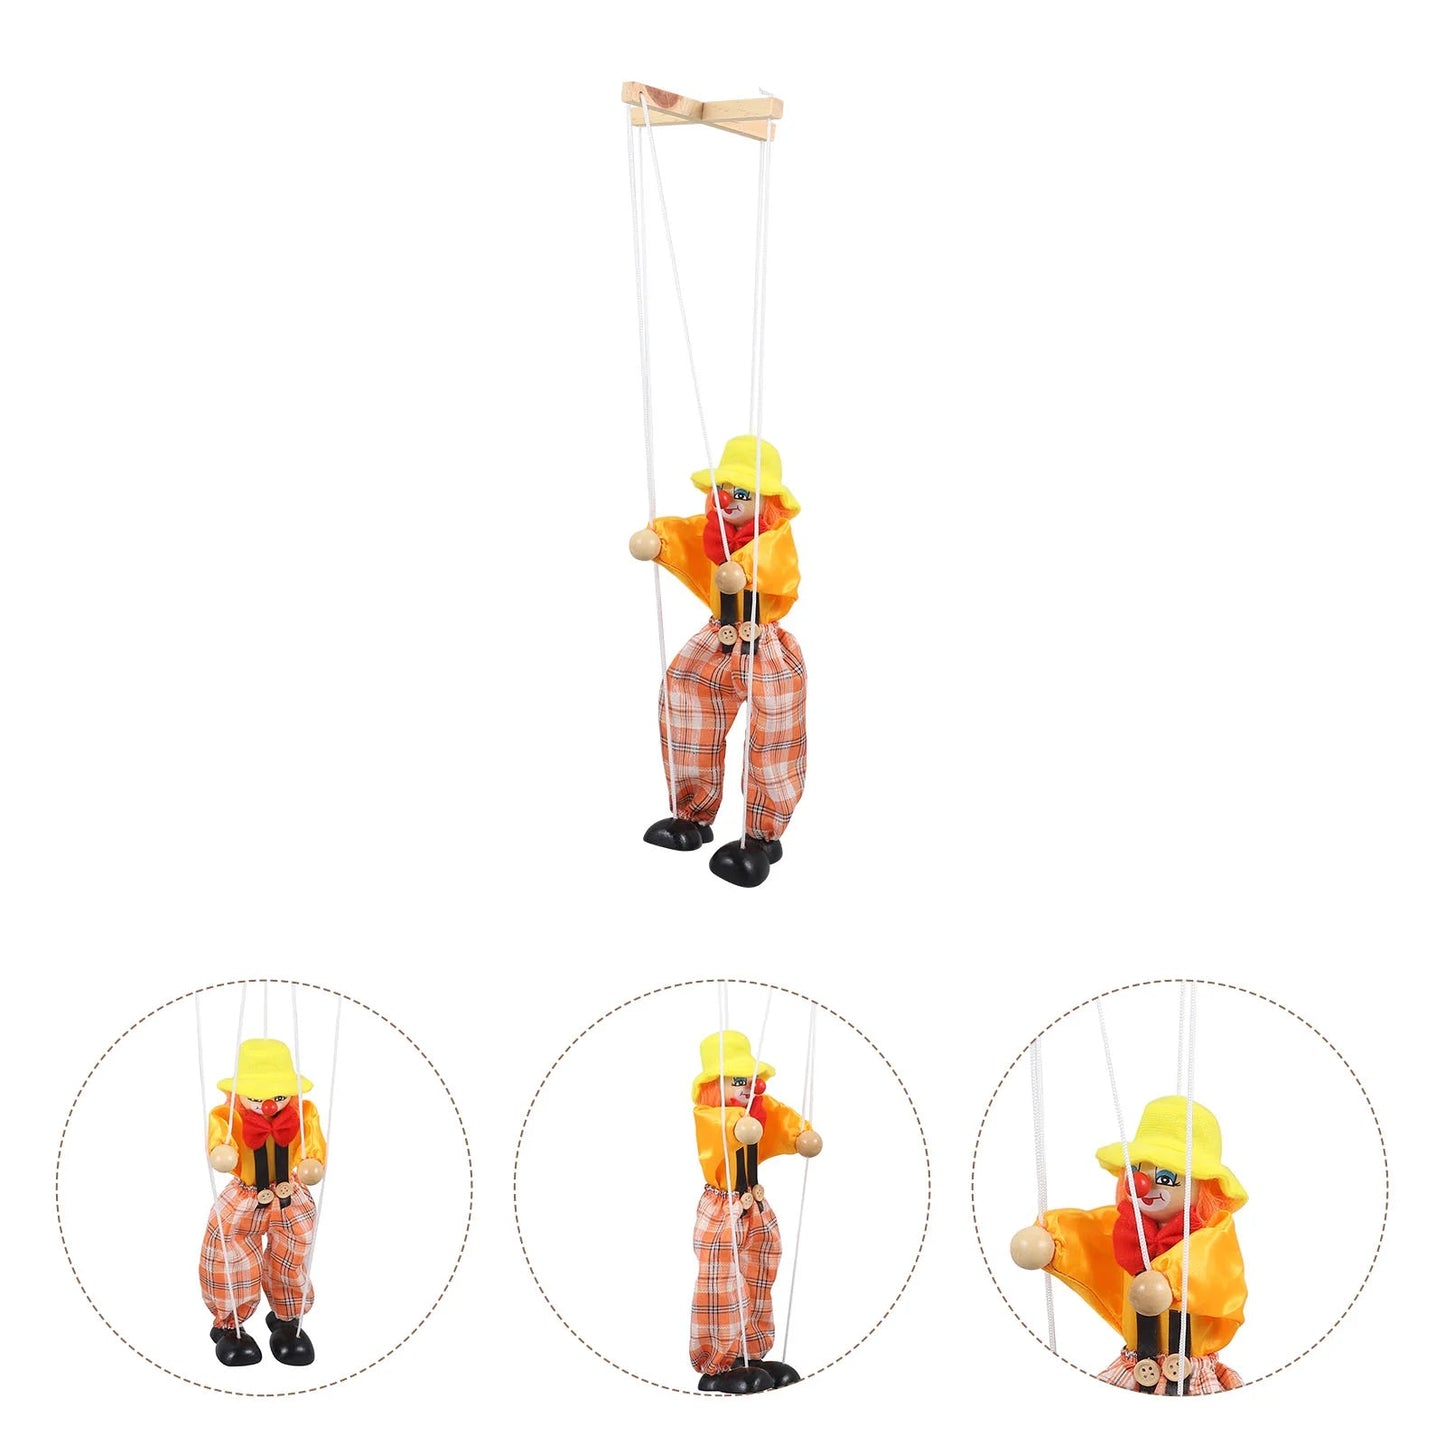 Marionette Puppet Theater Wood with Cloth Material for Children's Play - ToylandEU